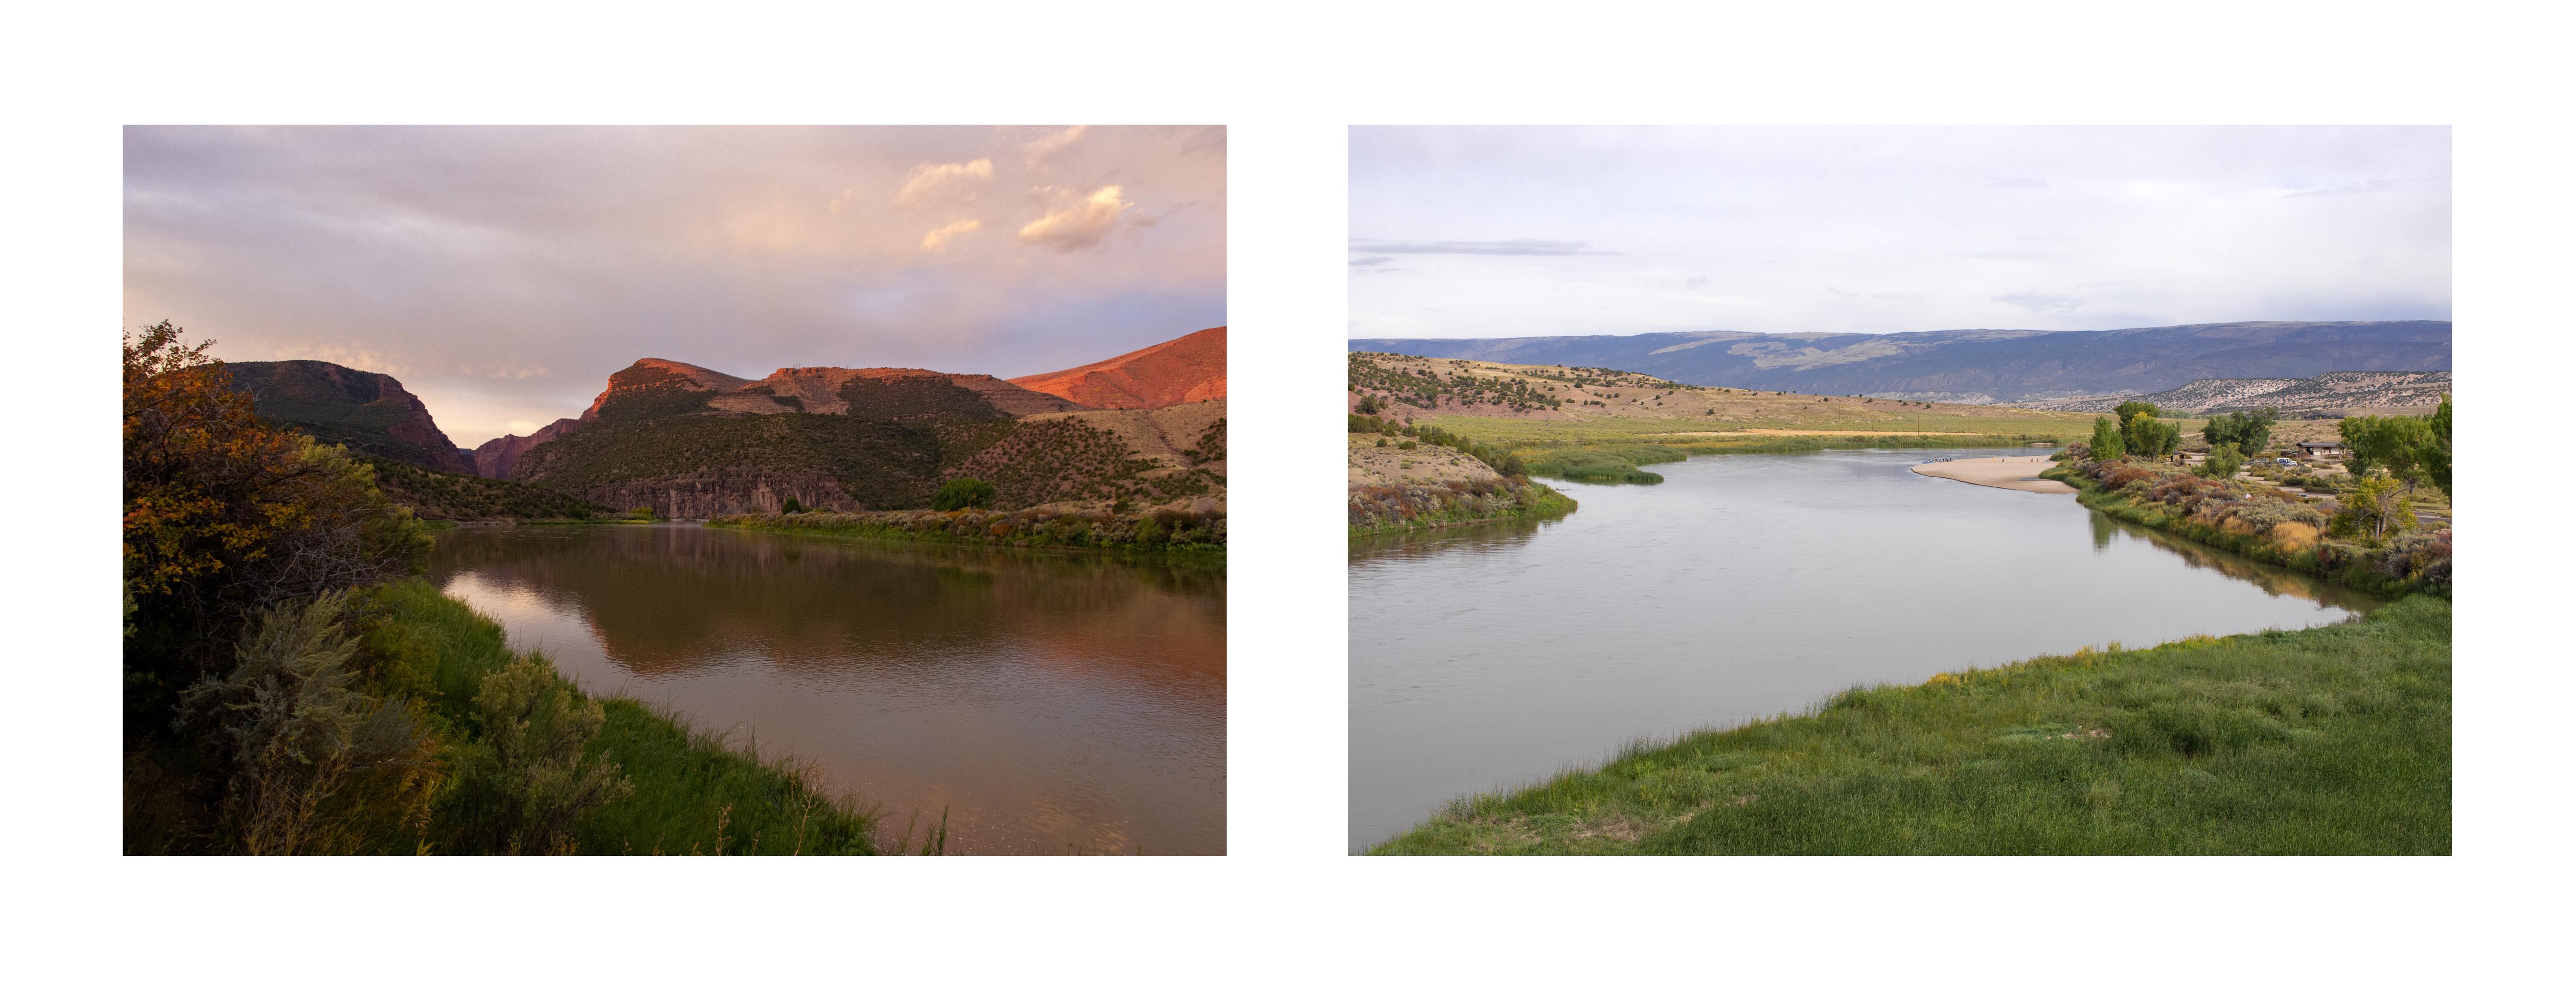 Edie Winograde Color Photograph - diptych from series Sight Seen; "Gates of Lodore, dawn" and "Green River, raft"